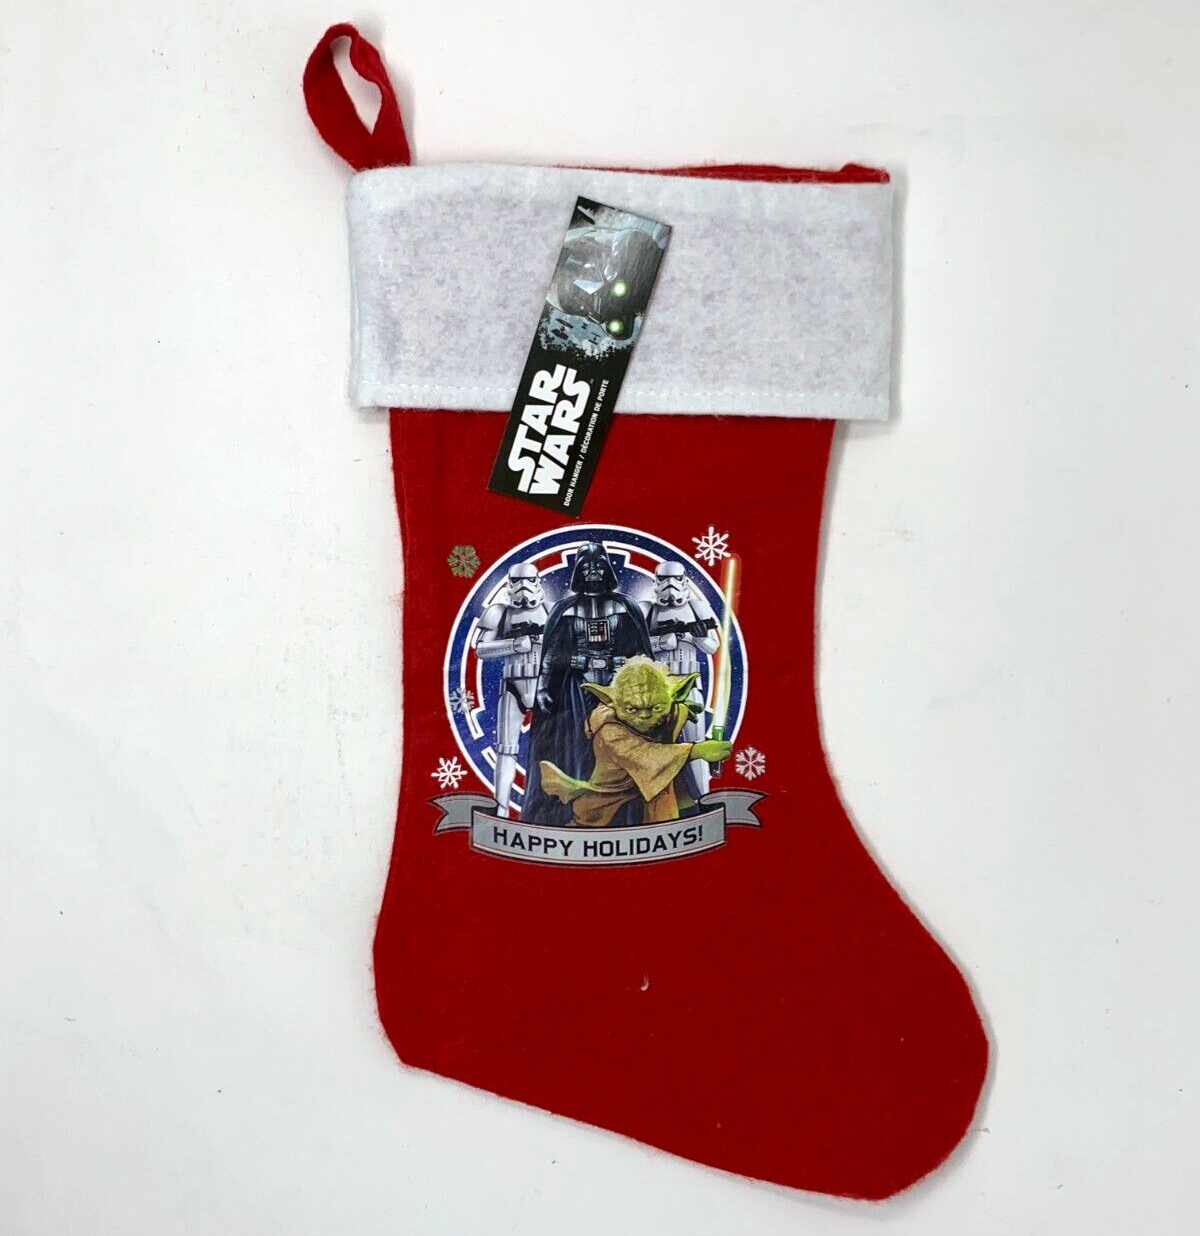 Primary image for Star Wars Happy Holidays Christmas Stockings